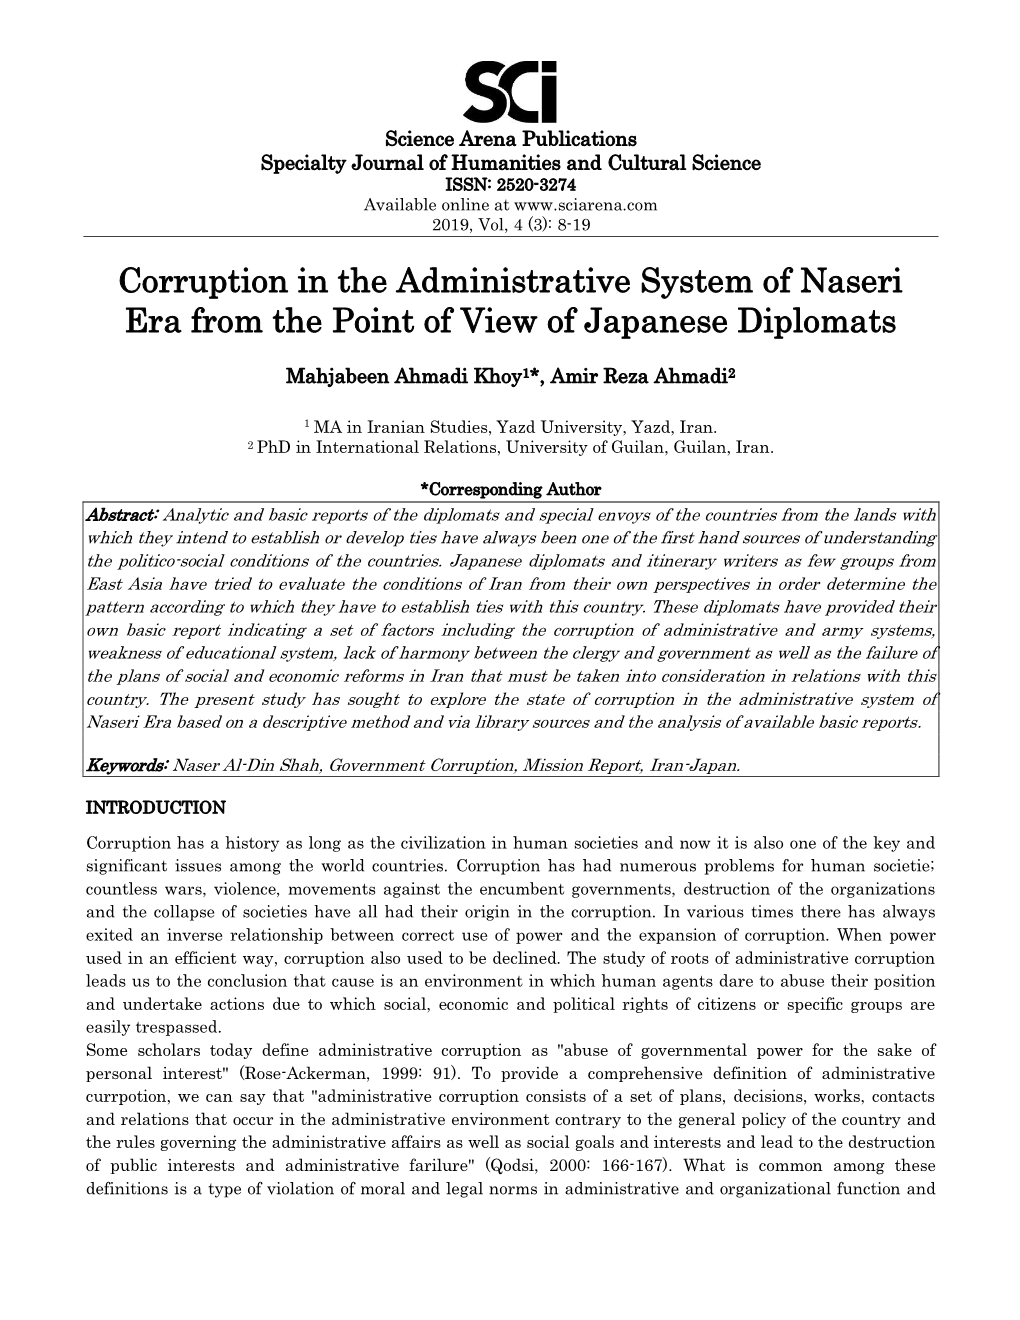 Corruption in the Administrative System of Naseri Era from the Point of View of Japanese Diplomats